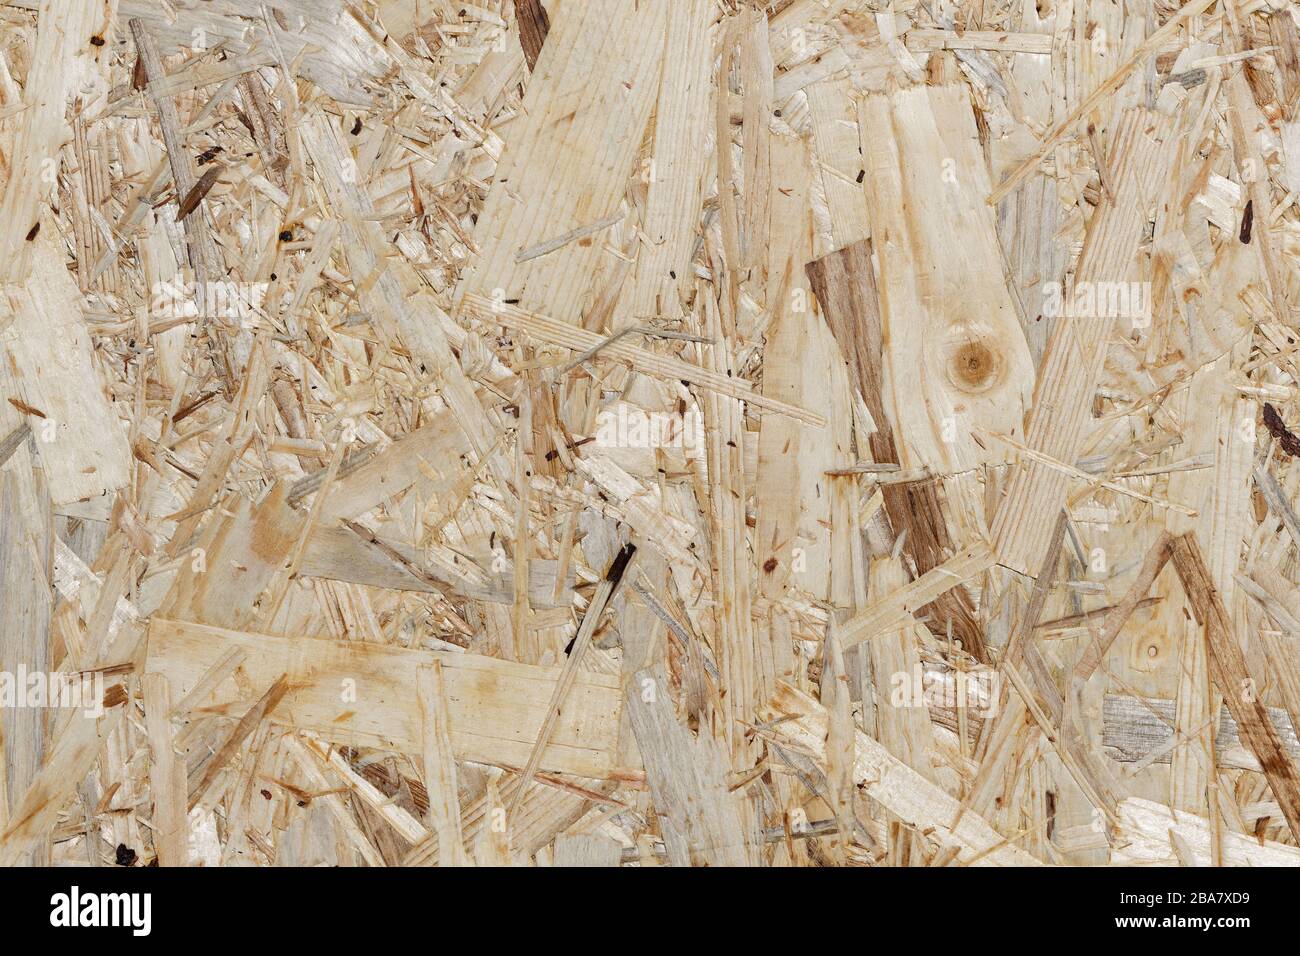 Waste Wood Recycling Background of an Oriented Strand Board: section of an oriented strand board, made of different kinds of softwood strands Stock Photo